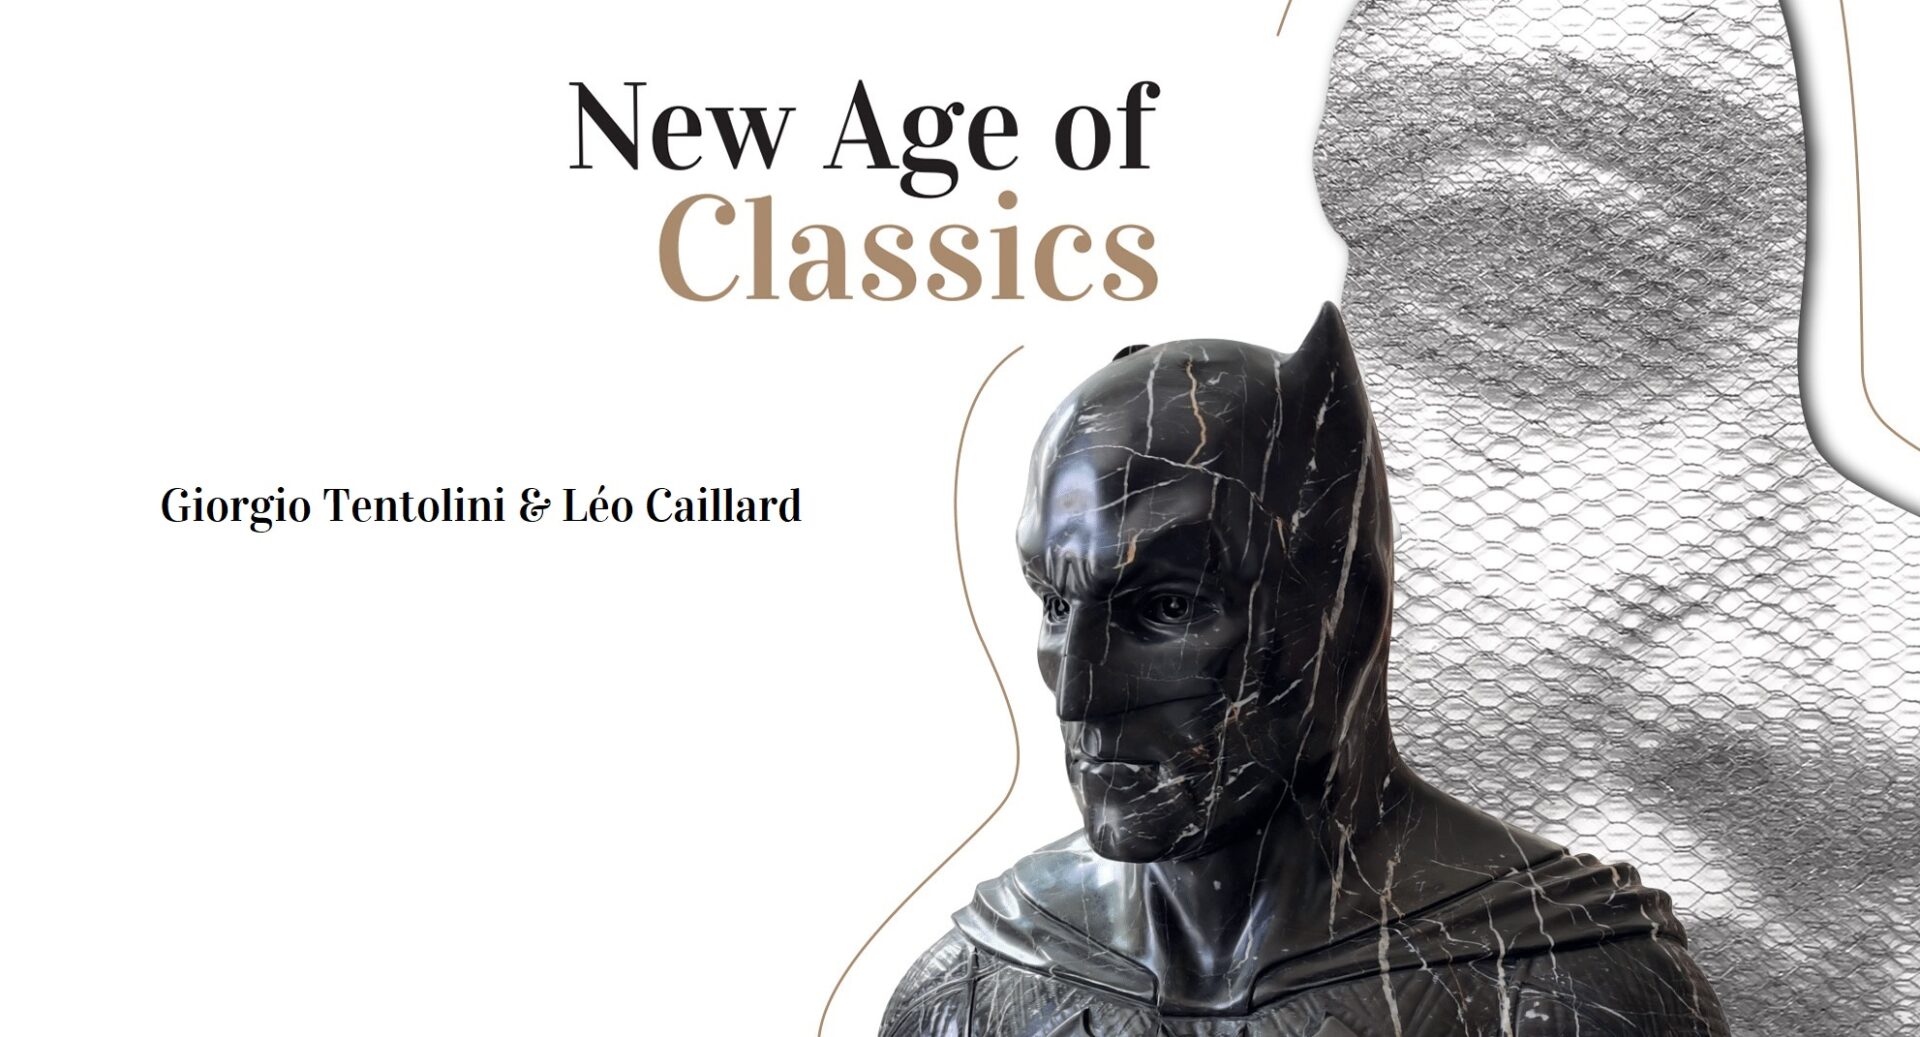 Cover picture from the catalog of the "New Age of Classics" exhibition at the Galerie Montmartre in Paris, France